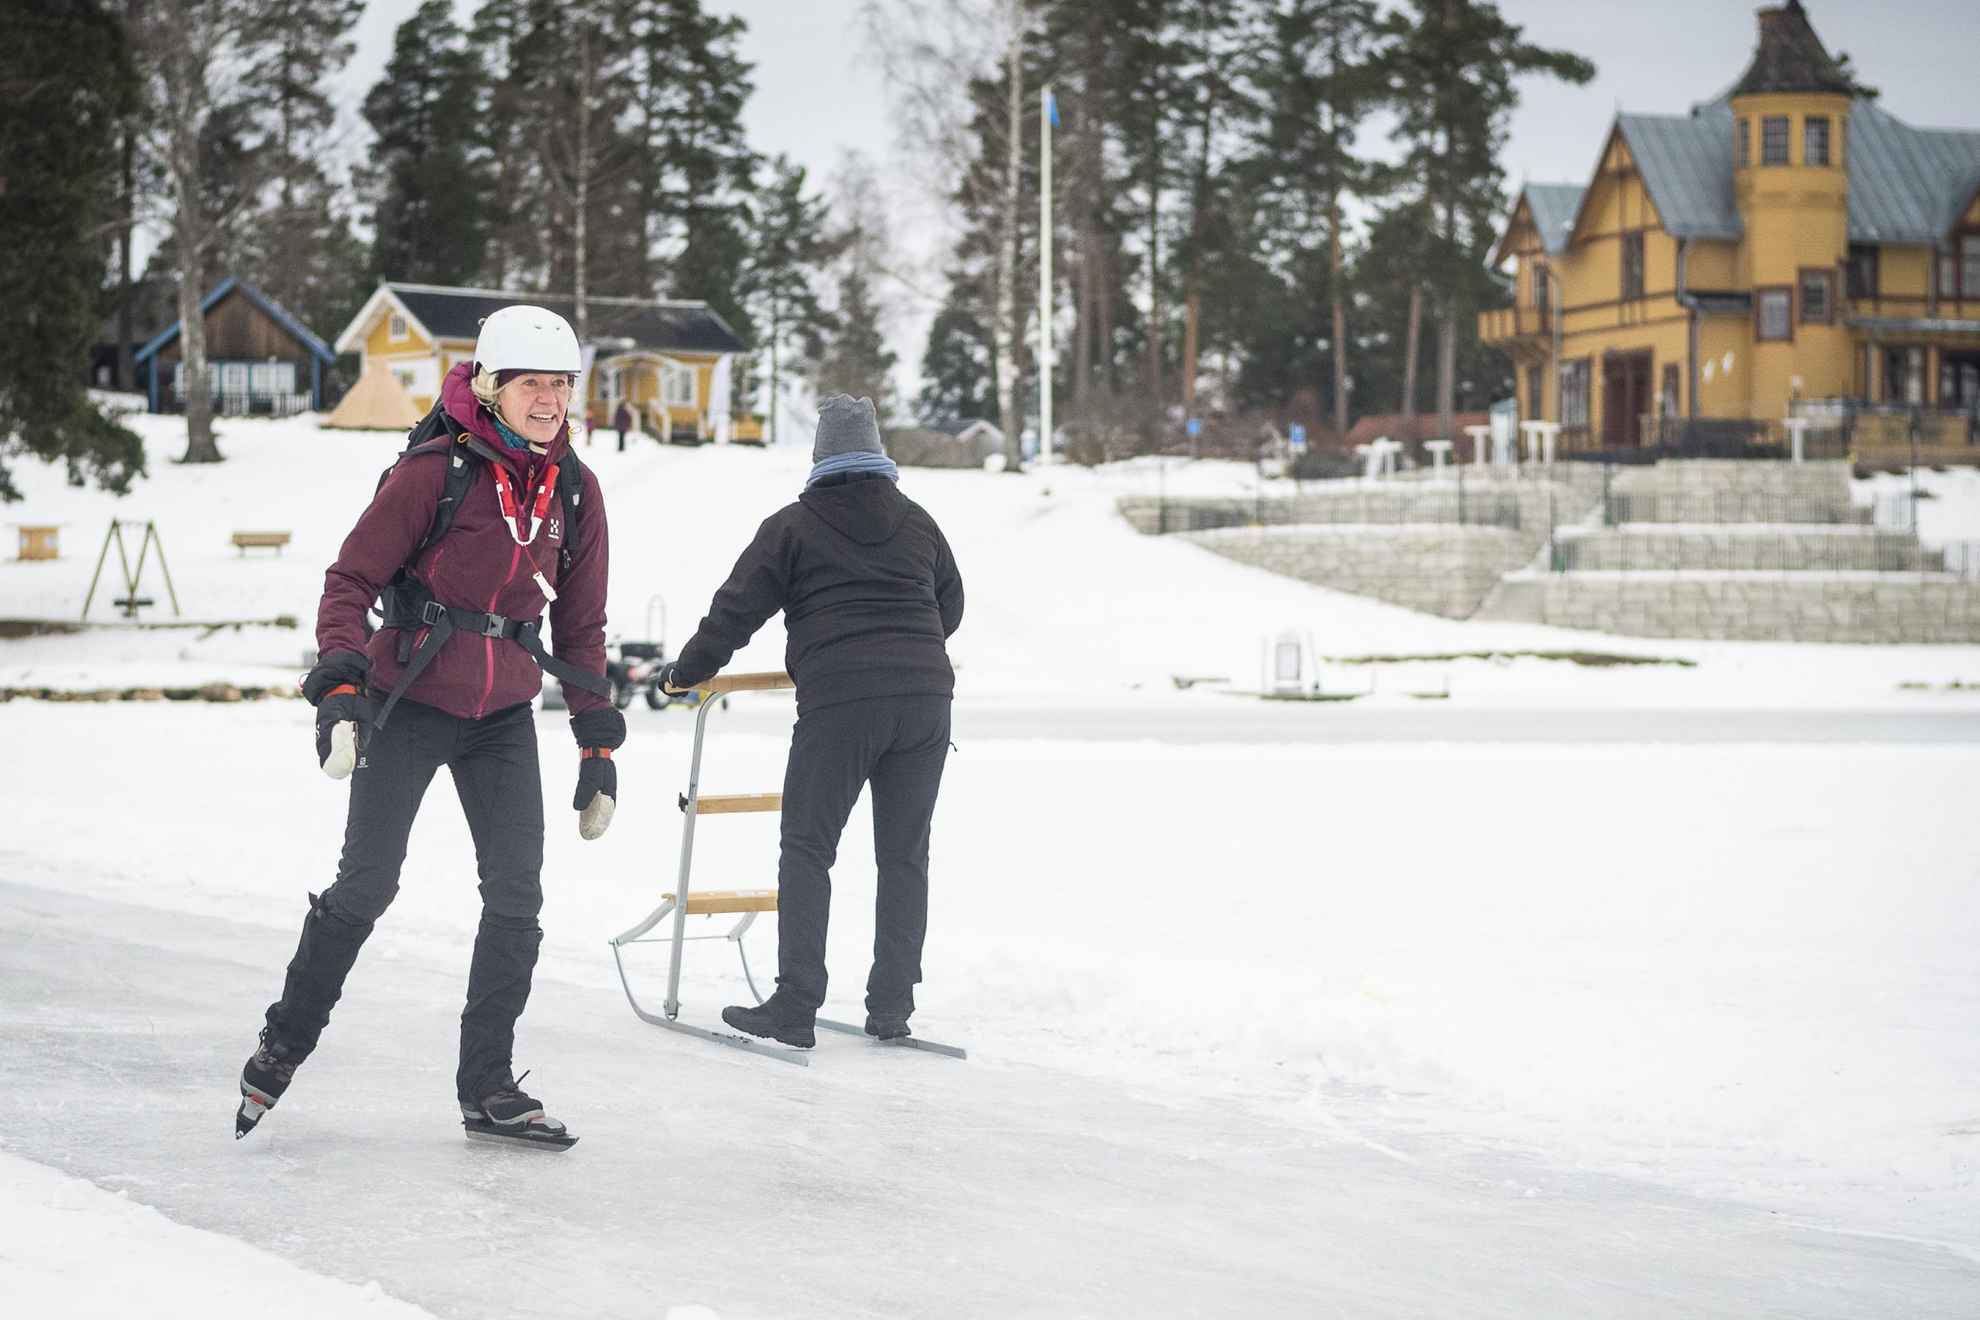 A woman is long distance skating while another person behind her is pushing a sled on the ice.